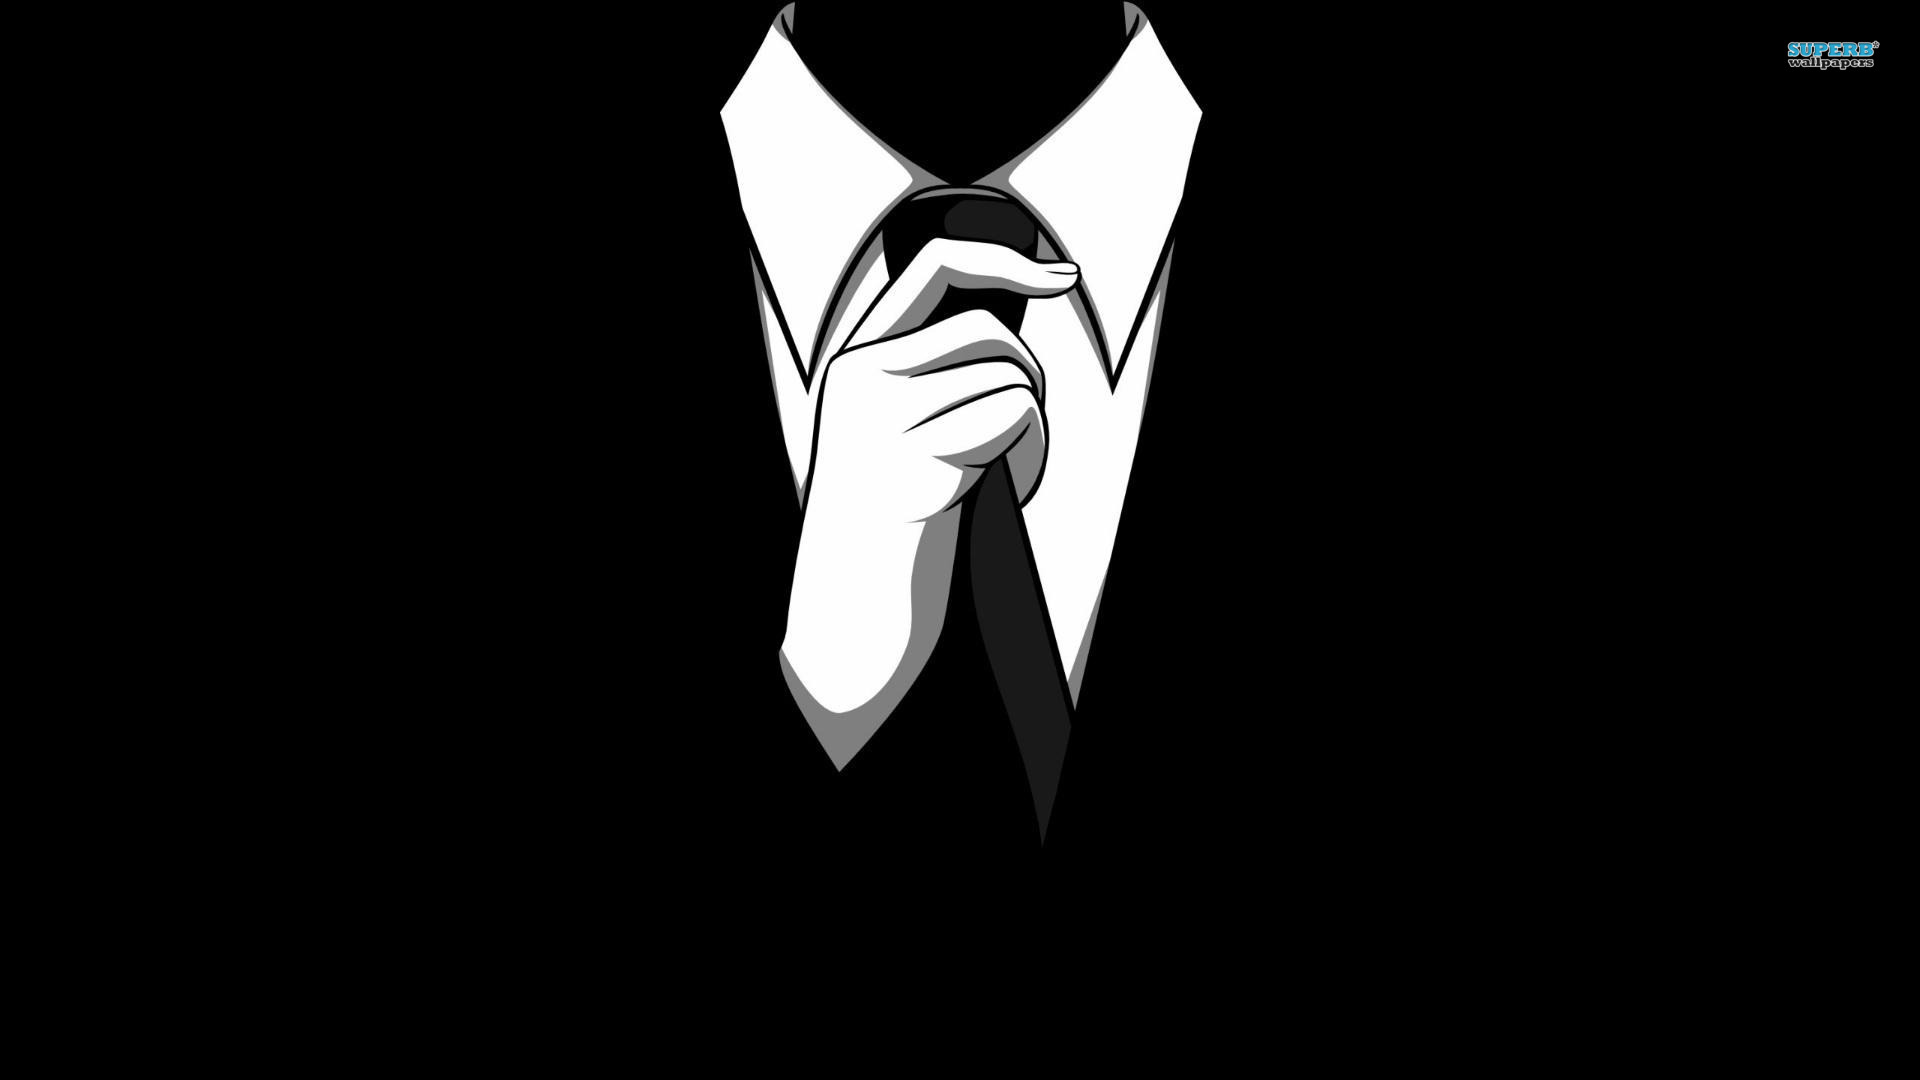 anonymous wallpapers hd gratuit 